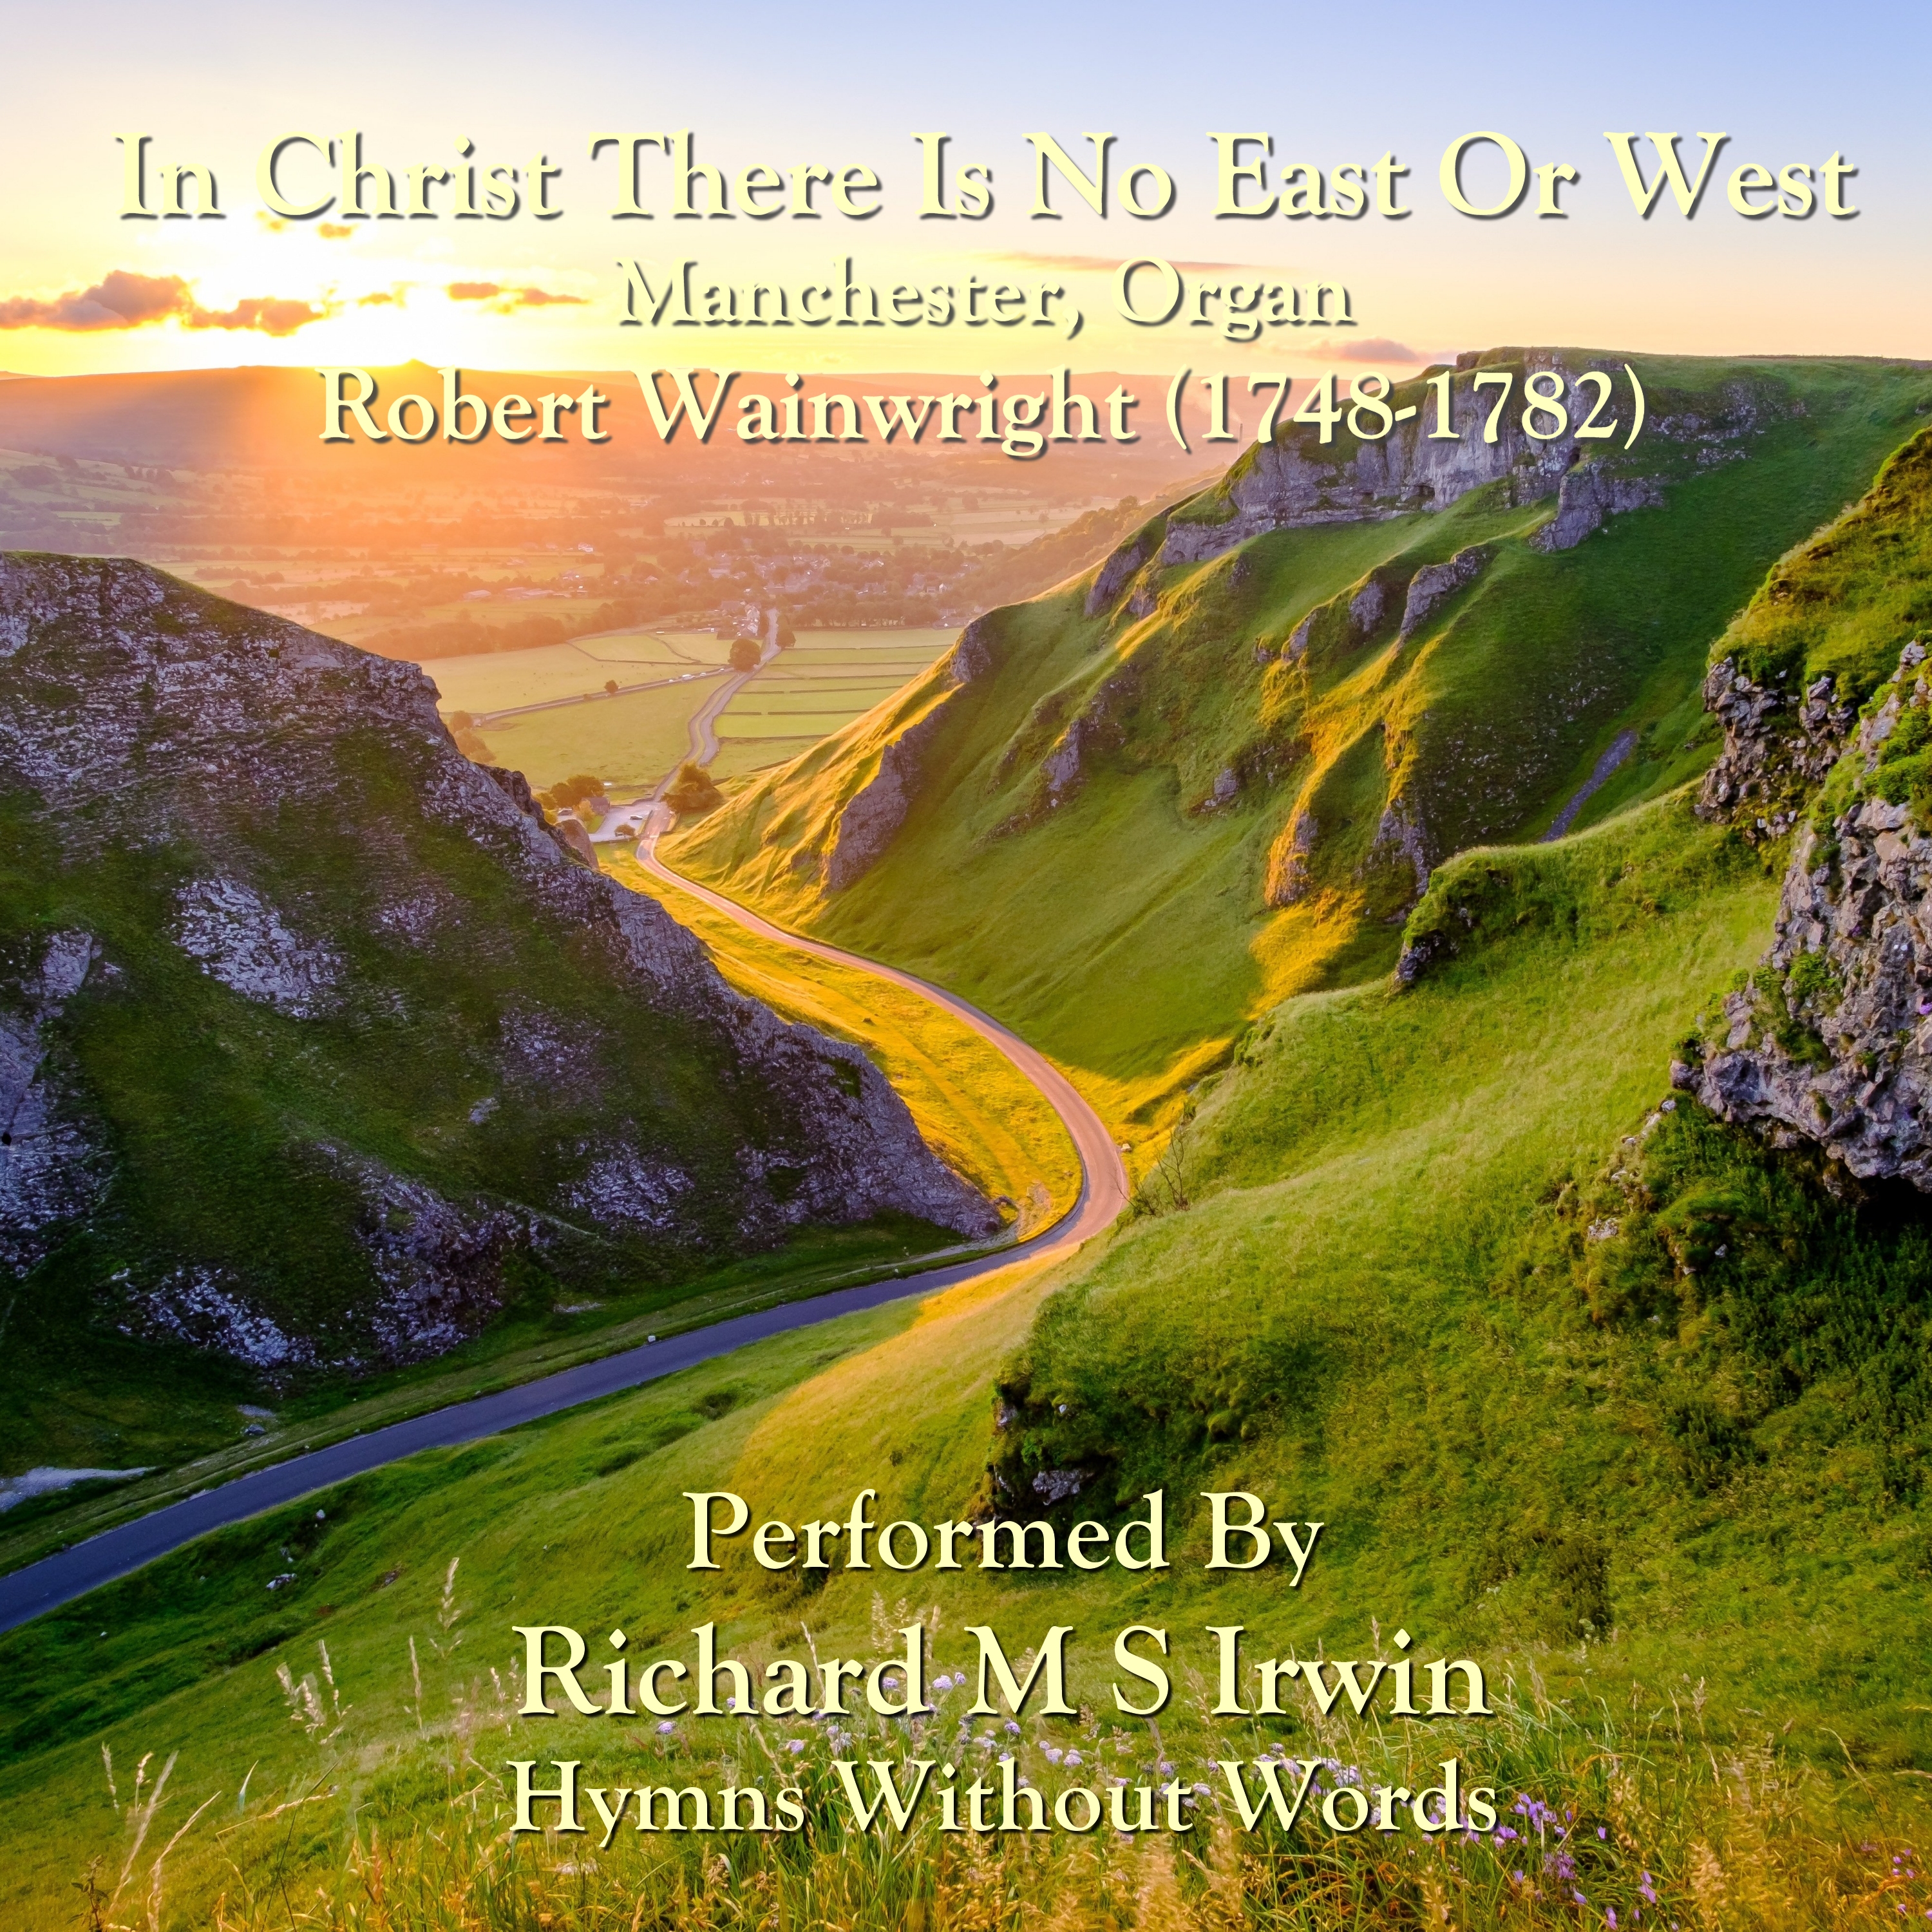 In Christ There Is No East Or West (Manchester, Organ, 4 Verses)